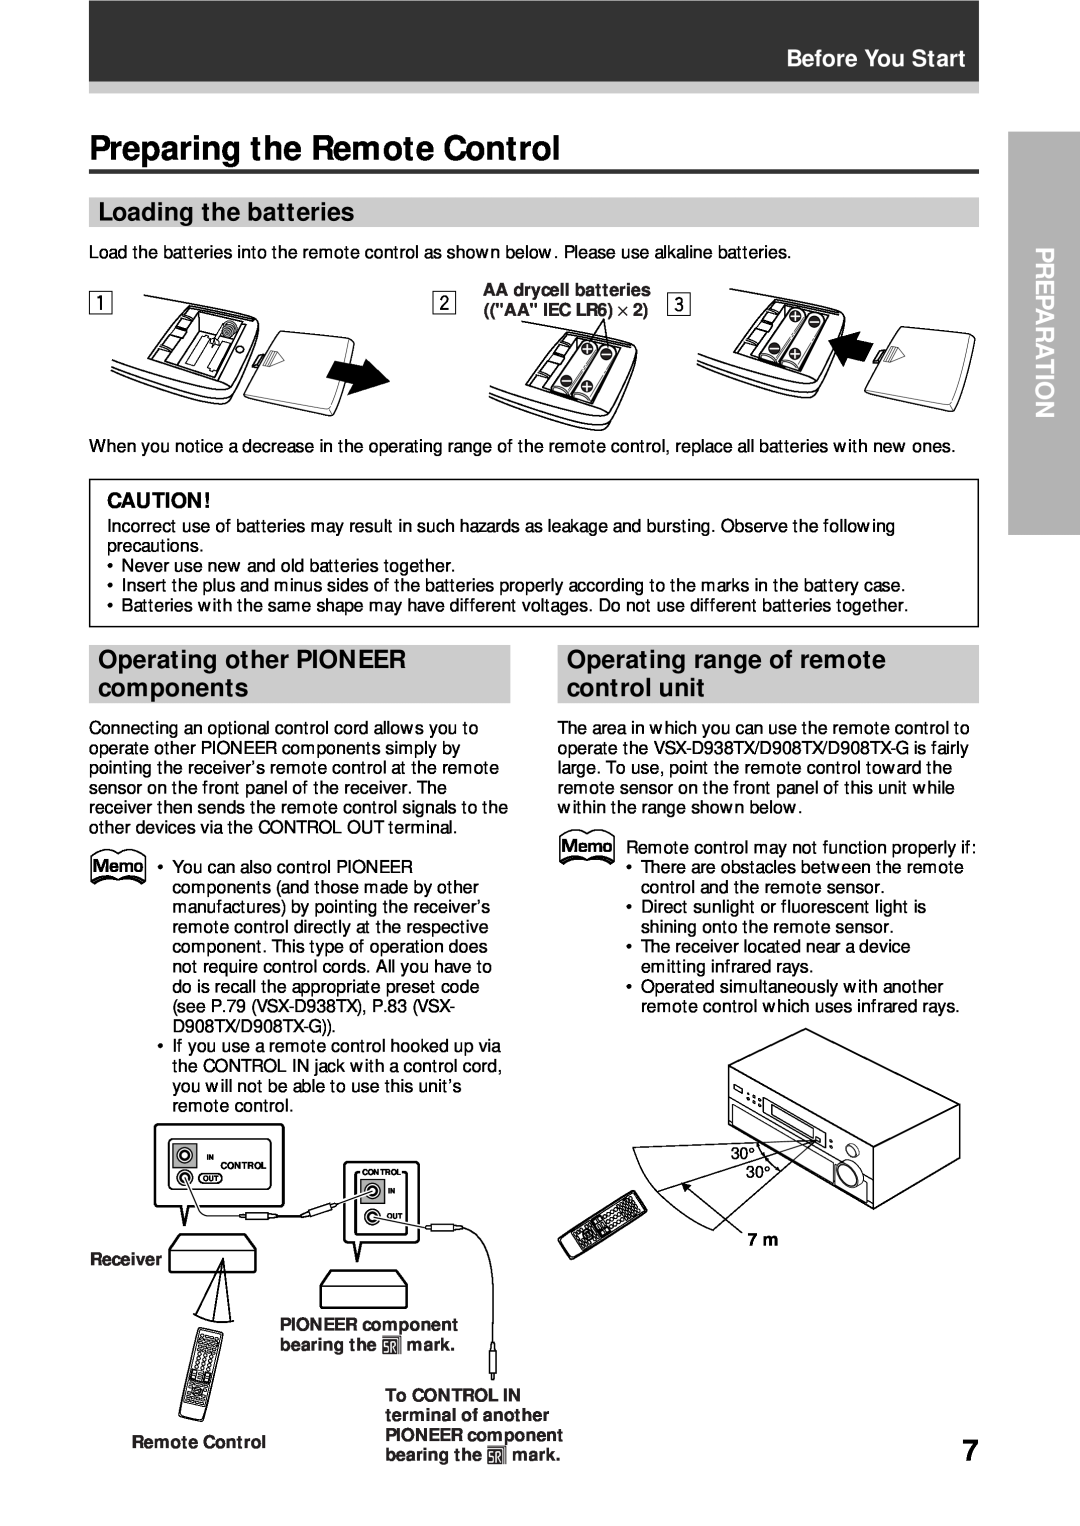 Pioneer VSX-D908TX-G manual Preparing the Remote Control, Preparation, Before You Start, AA drycell batteries, AA IEC LR6 × 